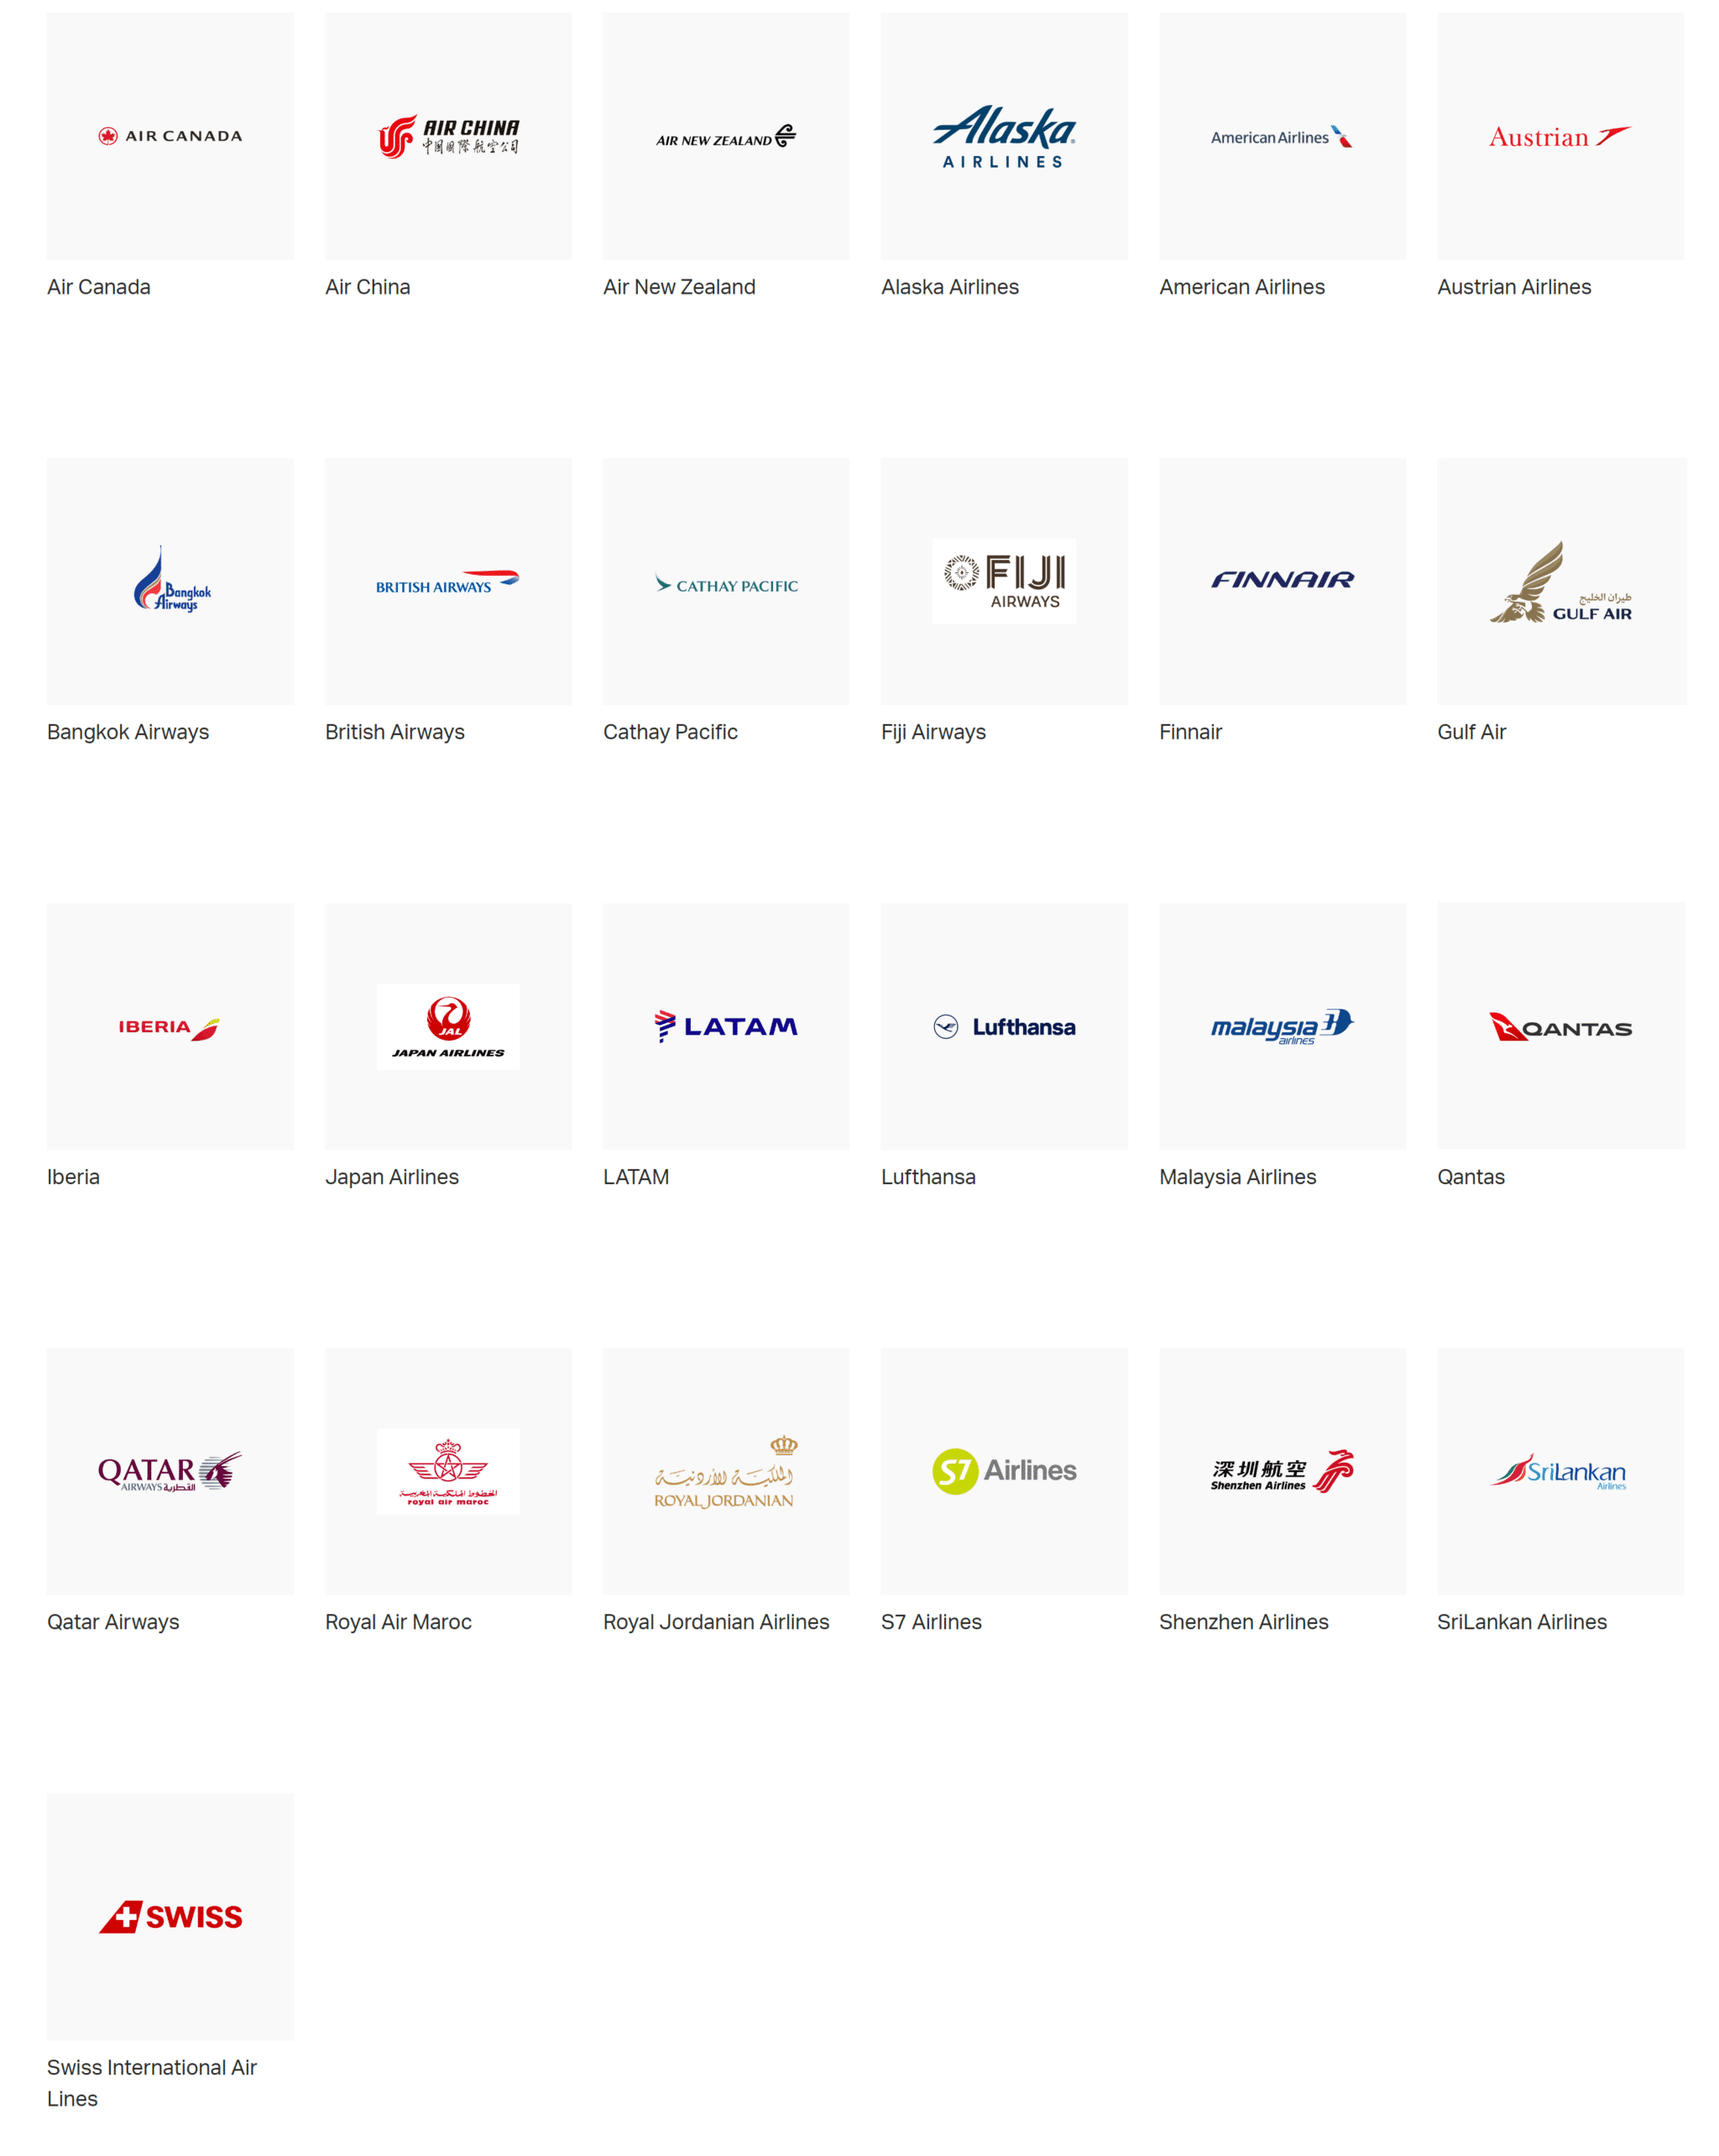 Airline partners of Cathay Pacific.